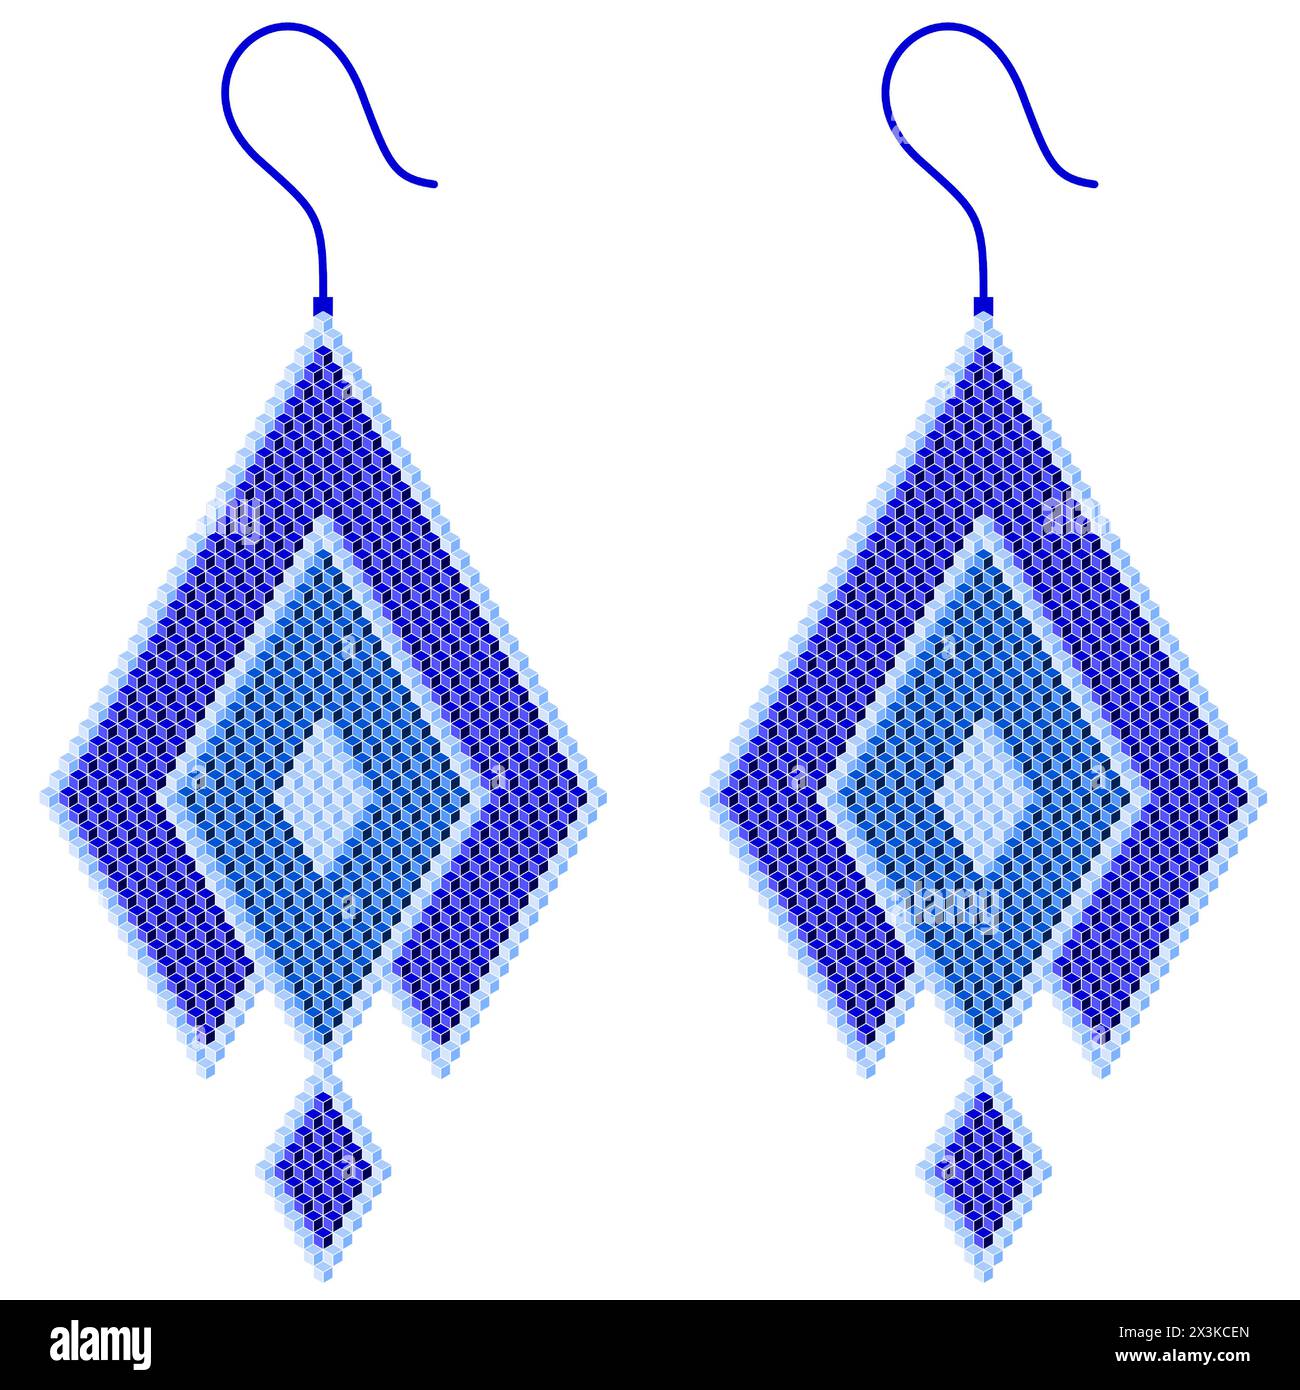 Two blue earrings composed of rhombuses of three shades of blue with a light blue edge and a pendant, which are built of 3D cubes Stock Vector